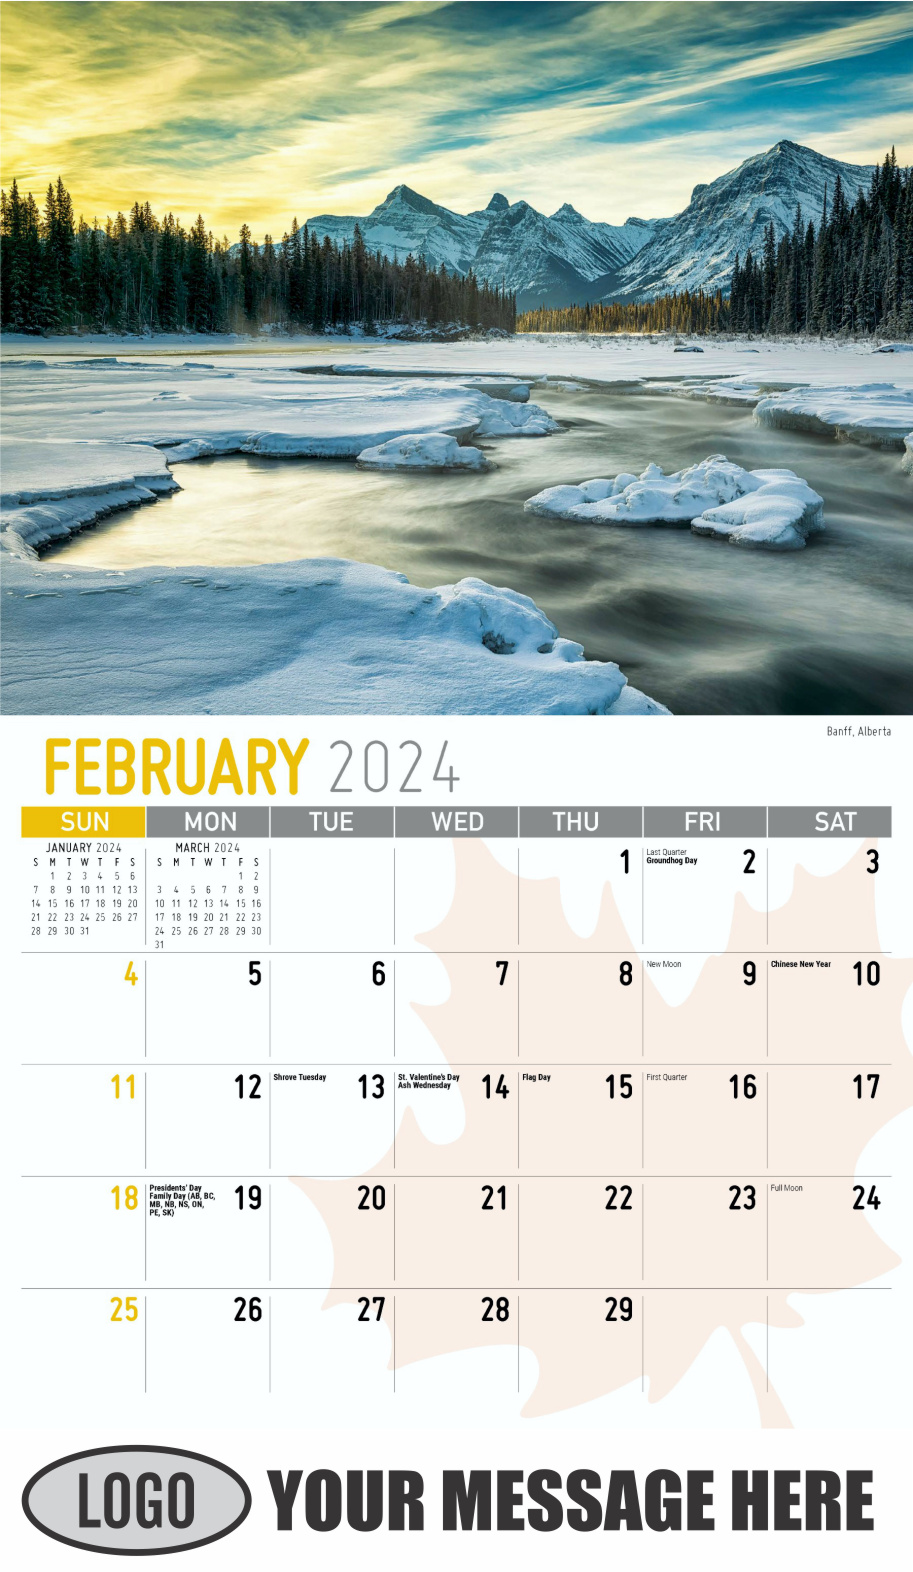 Scenes of Canada 2024 Business Promotion Wall Calendar - February